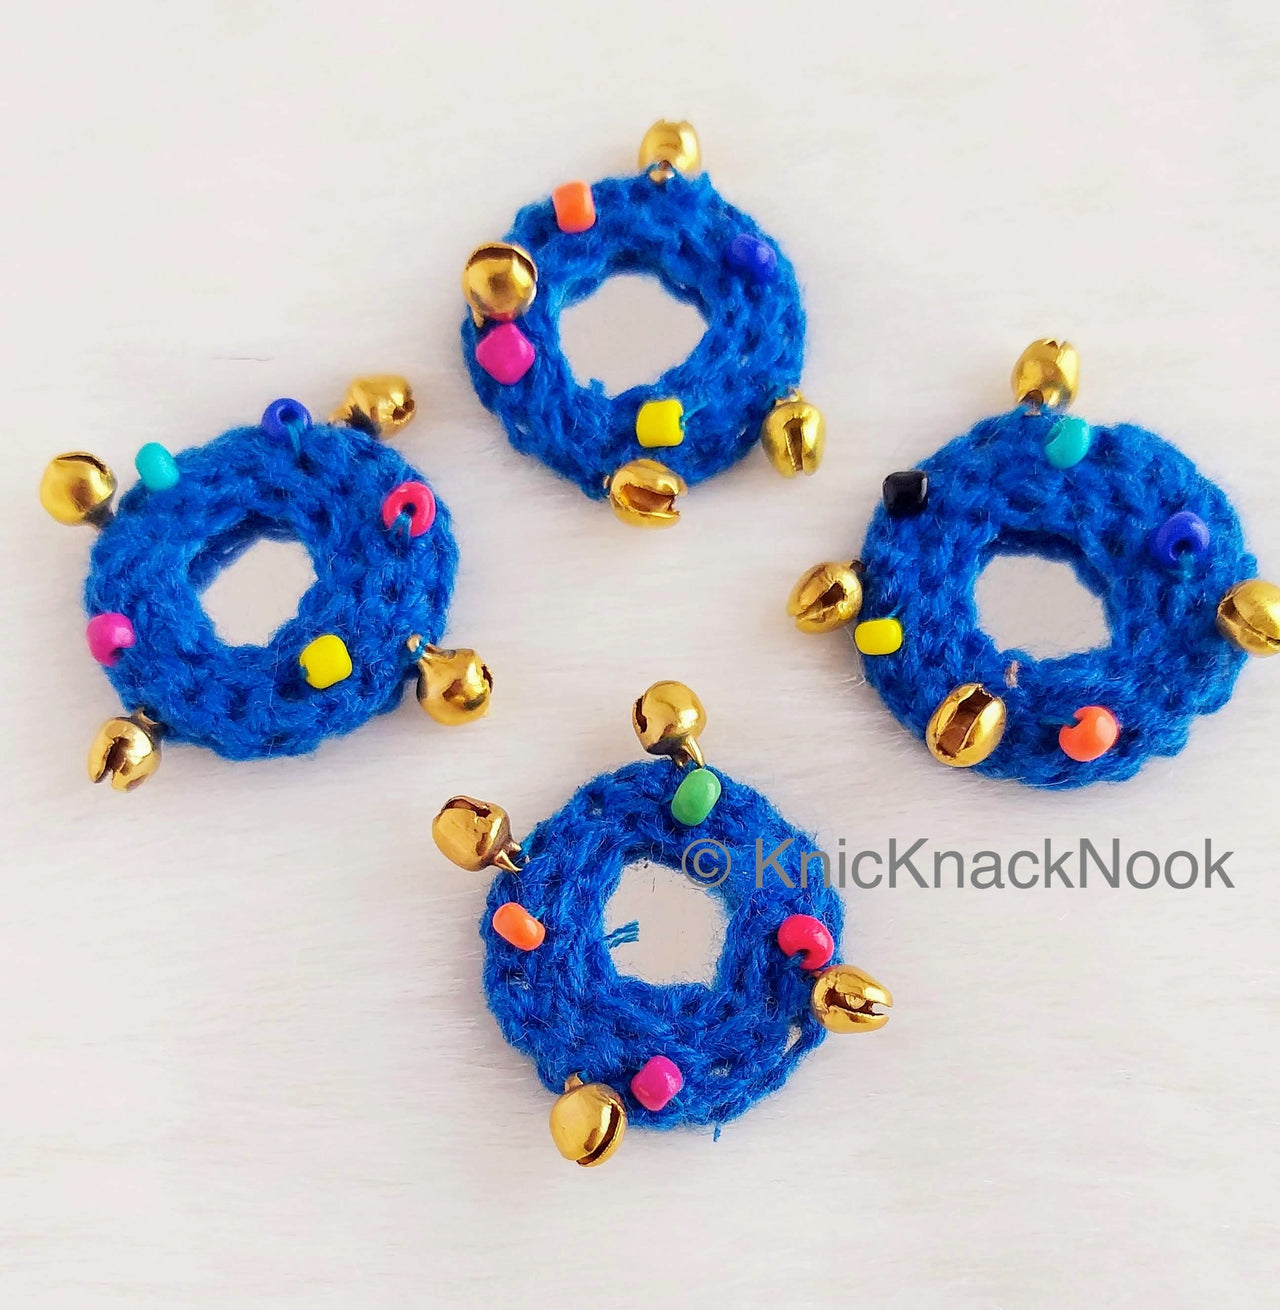 Circle Shaped Mirrored Applique With Jingle Bell Beads And Multicoloured Beads, Bohemian Applique, Summer Applique